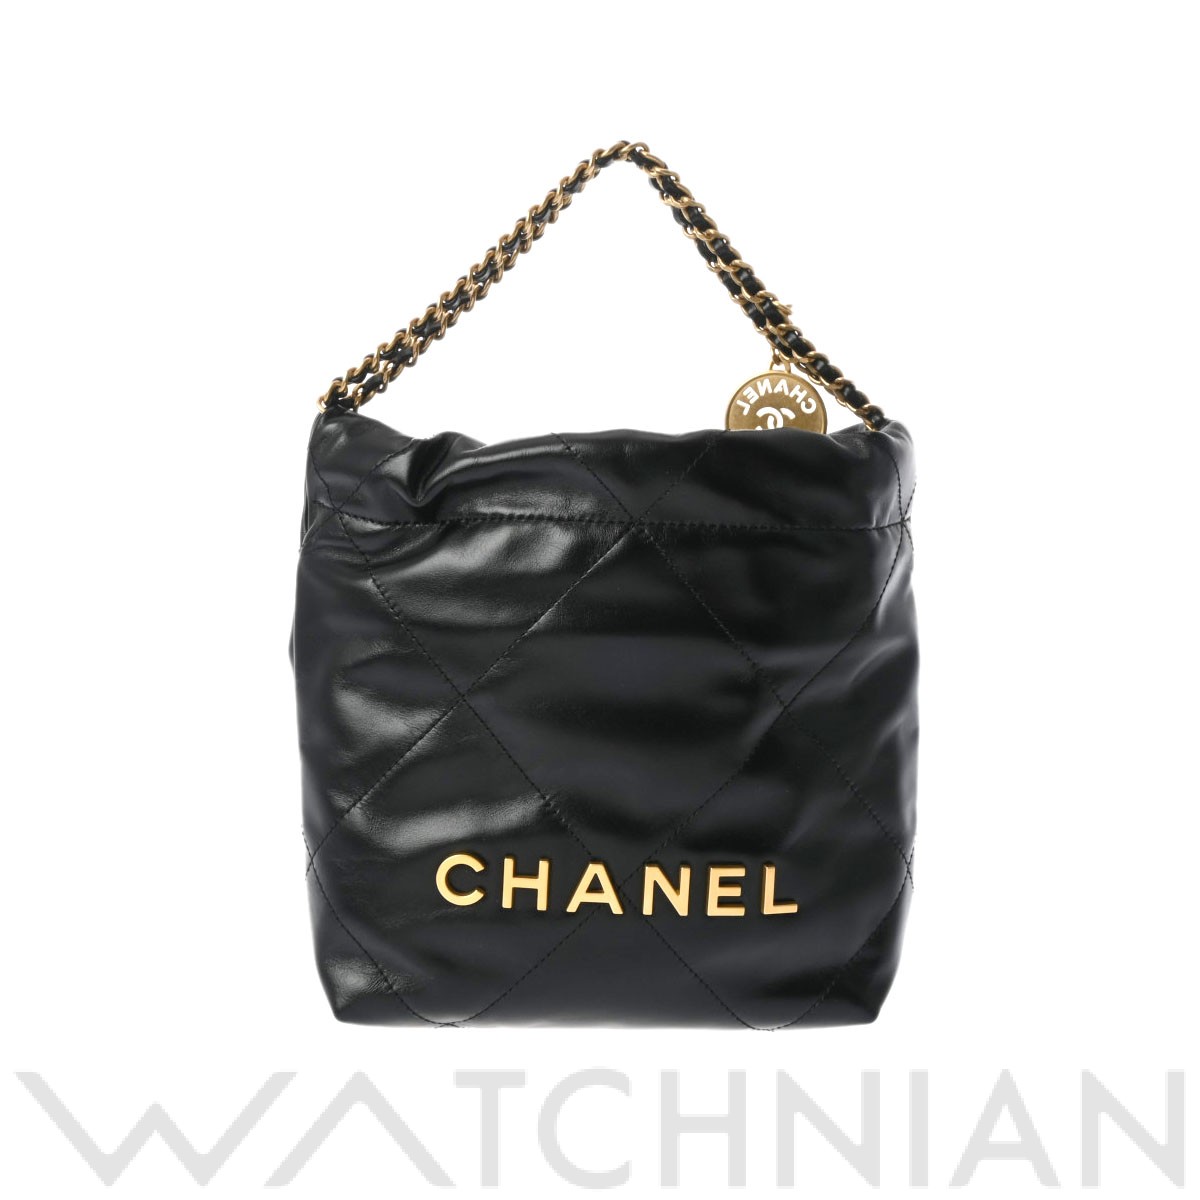 CHANEL  CHANEL22バッグ  CHANEL22  新品バッグ